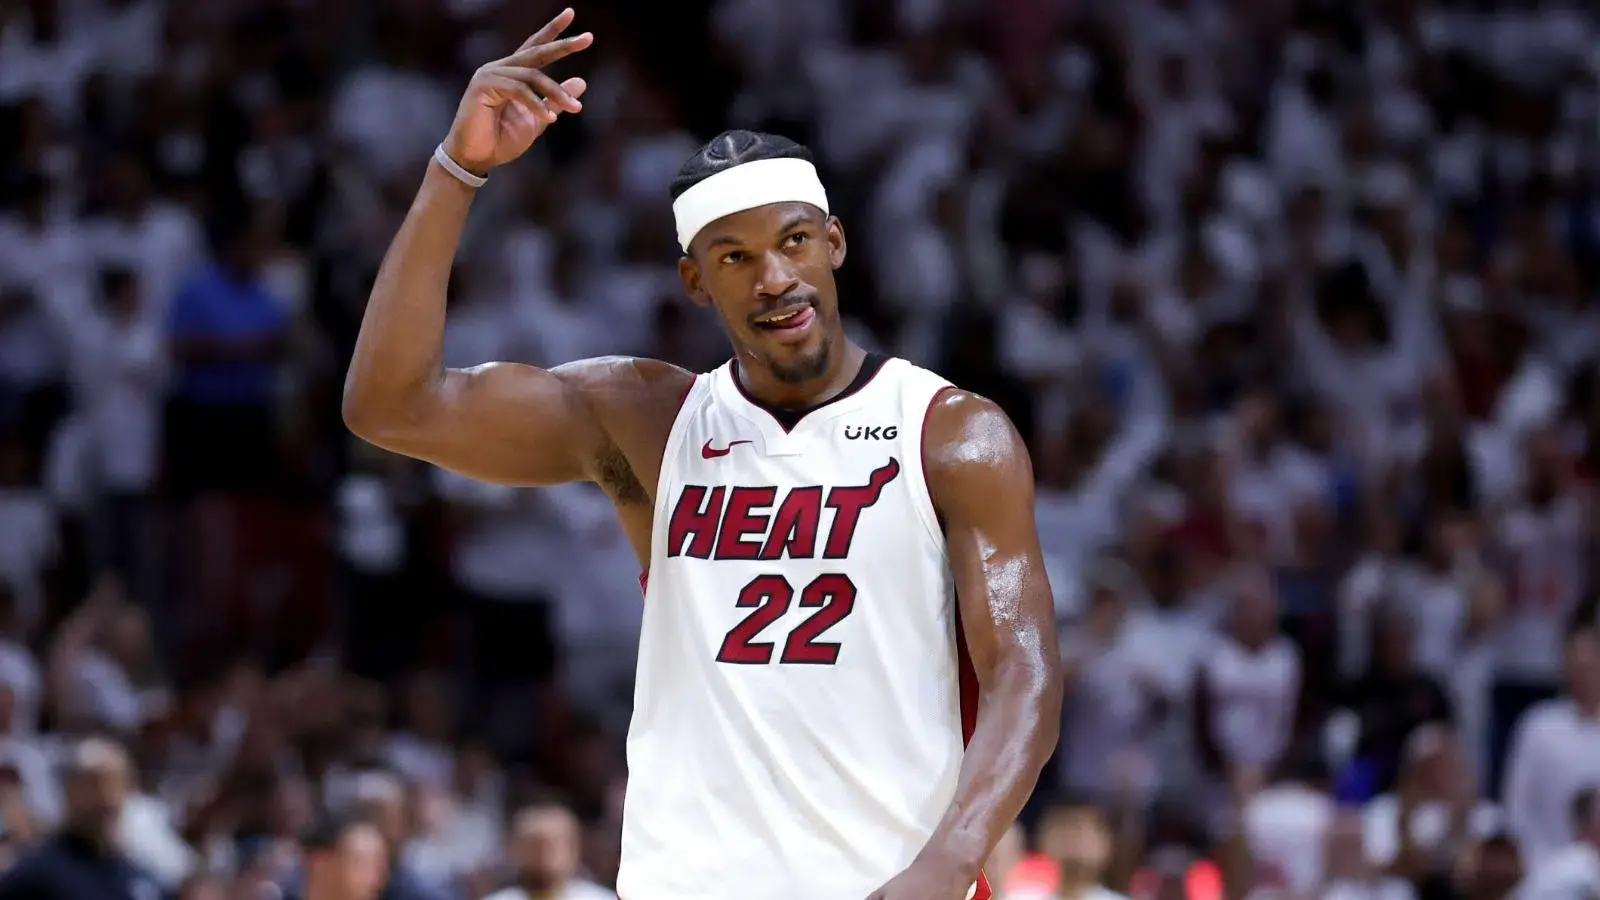 Butler wants a new star by his side in Miami Heat